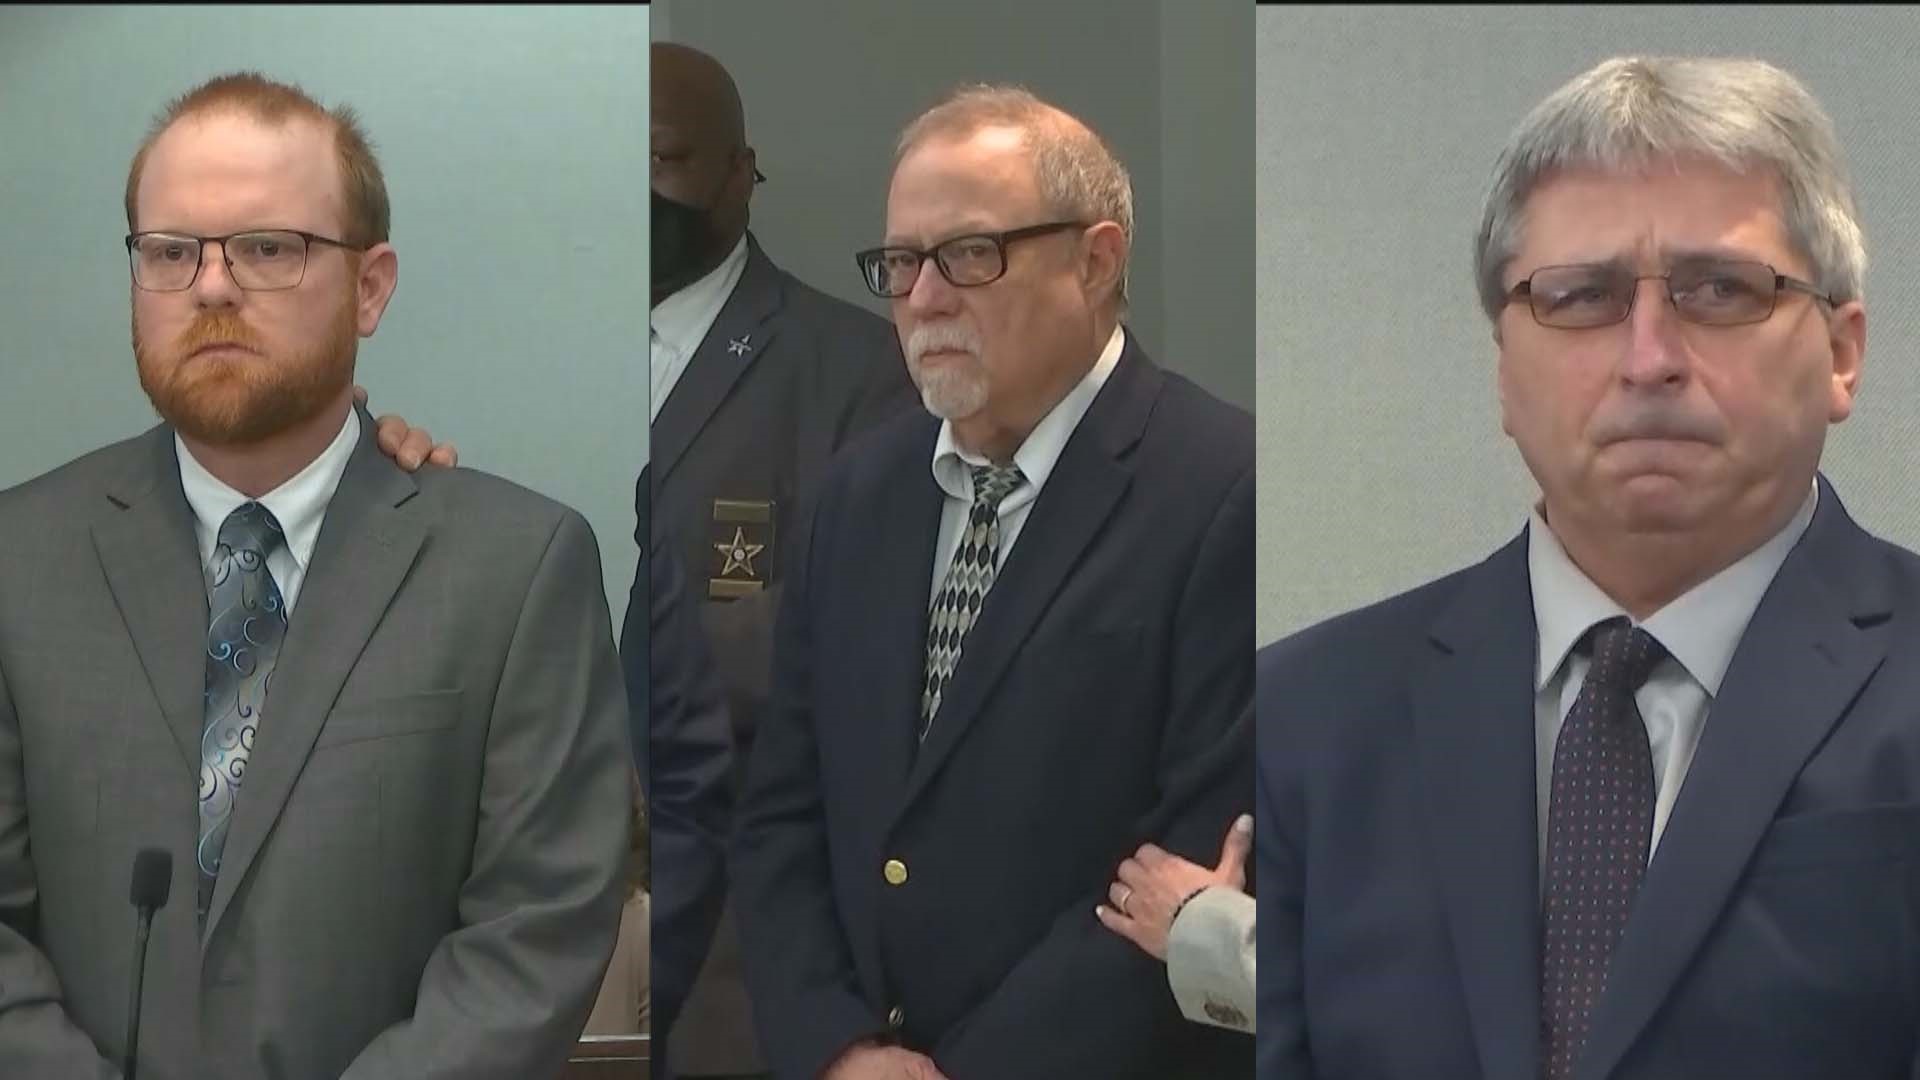 The three men will appear in court once again, at the federal courthouse in Brunswick, to be tried on hate crimes charges.